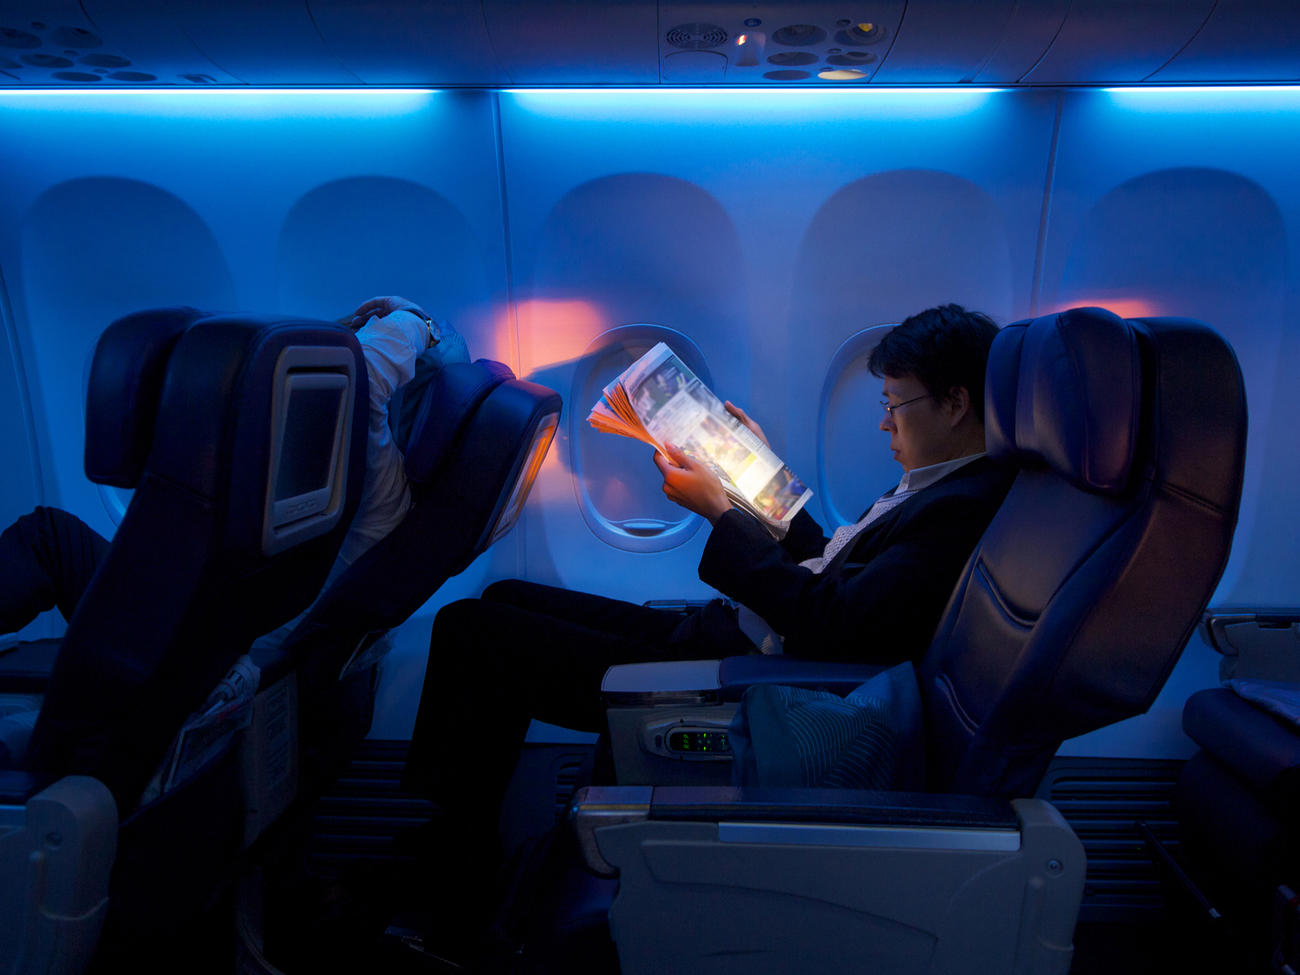 Why Do Airplanes Dim Lights on Takeoff?